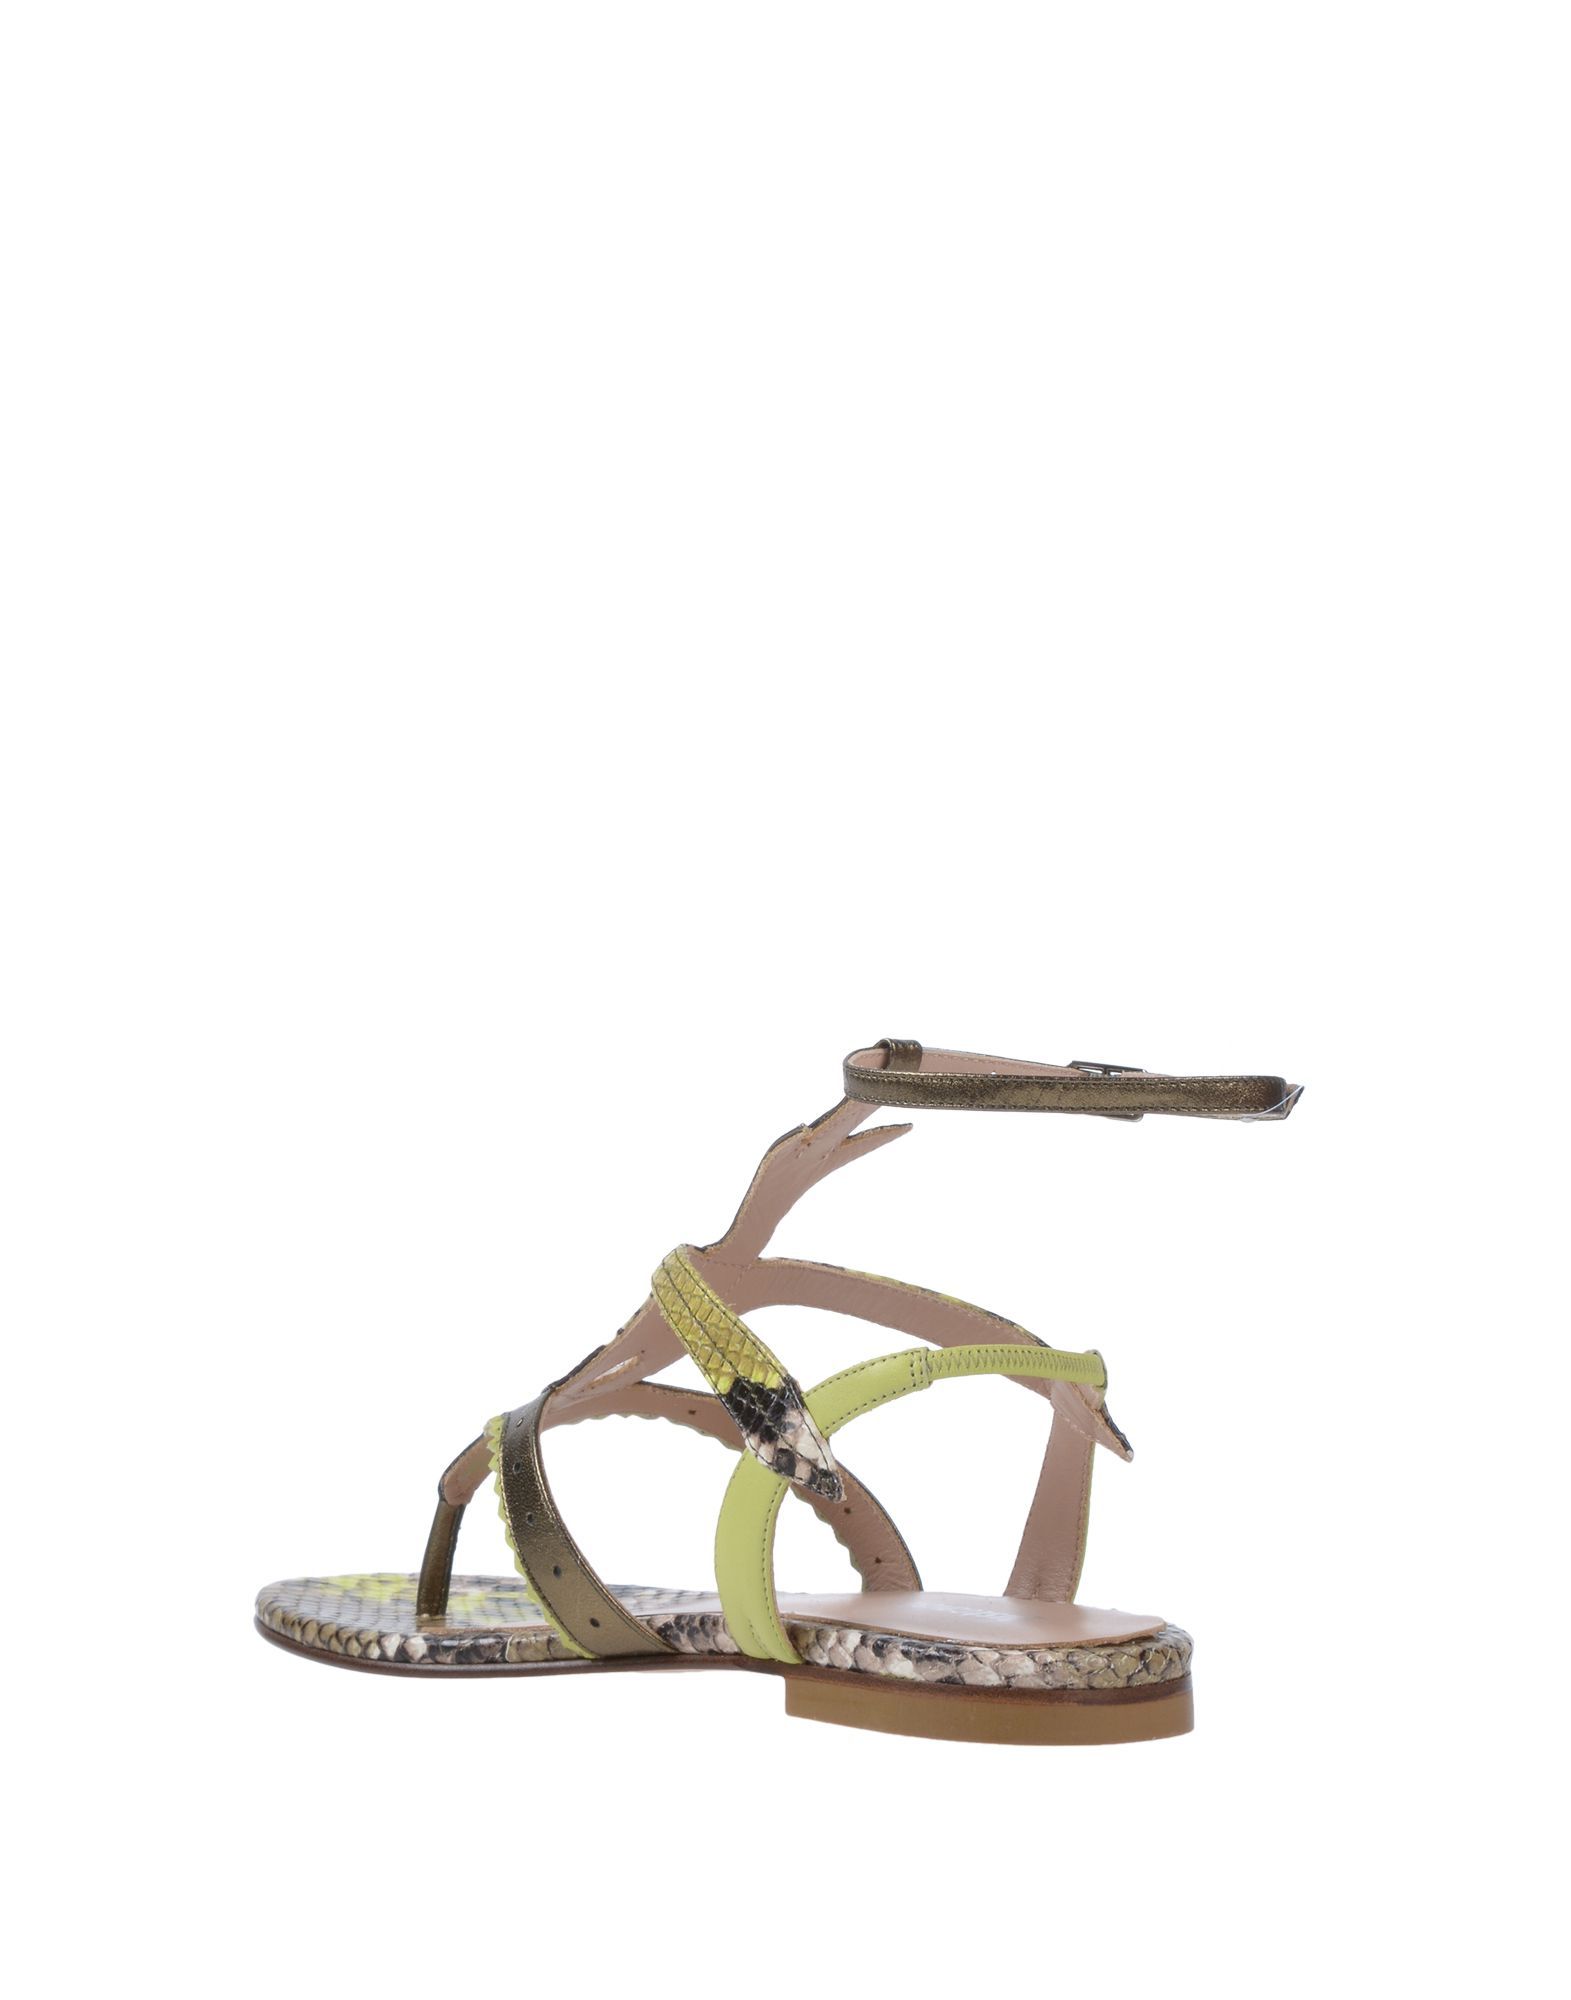 laminated effect, snakeskin print, no appliqués, multicolour pattern, buckling ankle strap closure, round toeline, flat, leather lining, leather sole, contains non-textile parts of animal origin